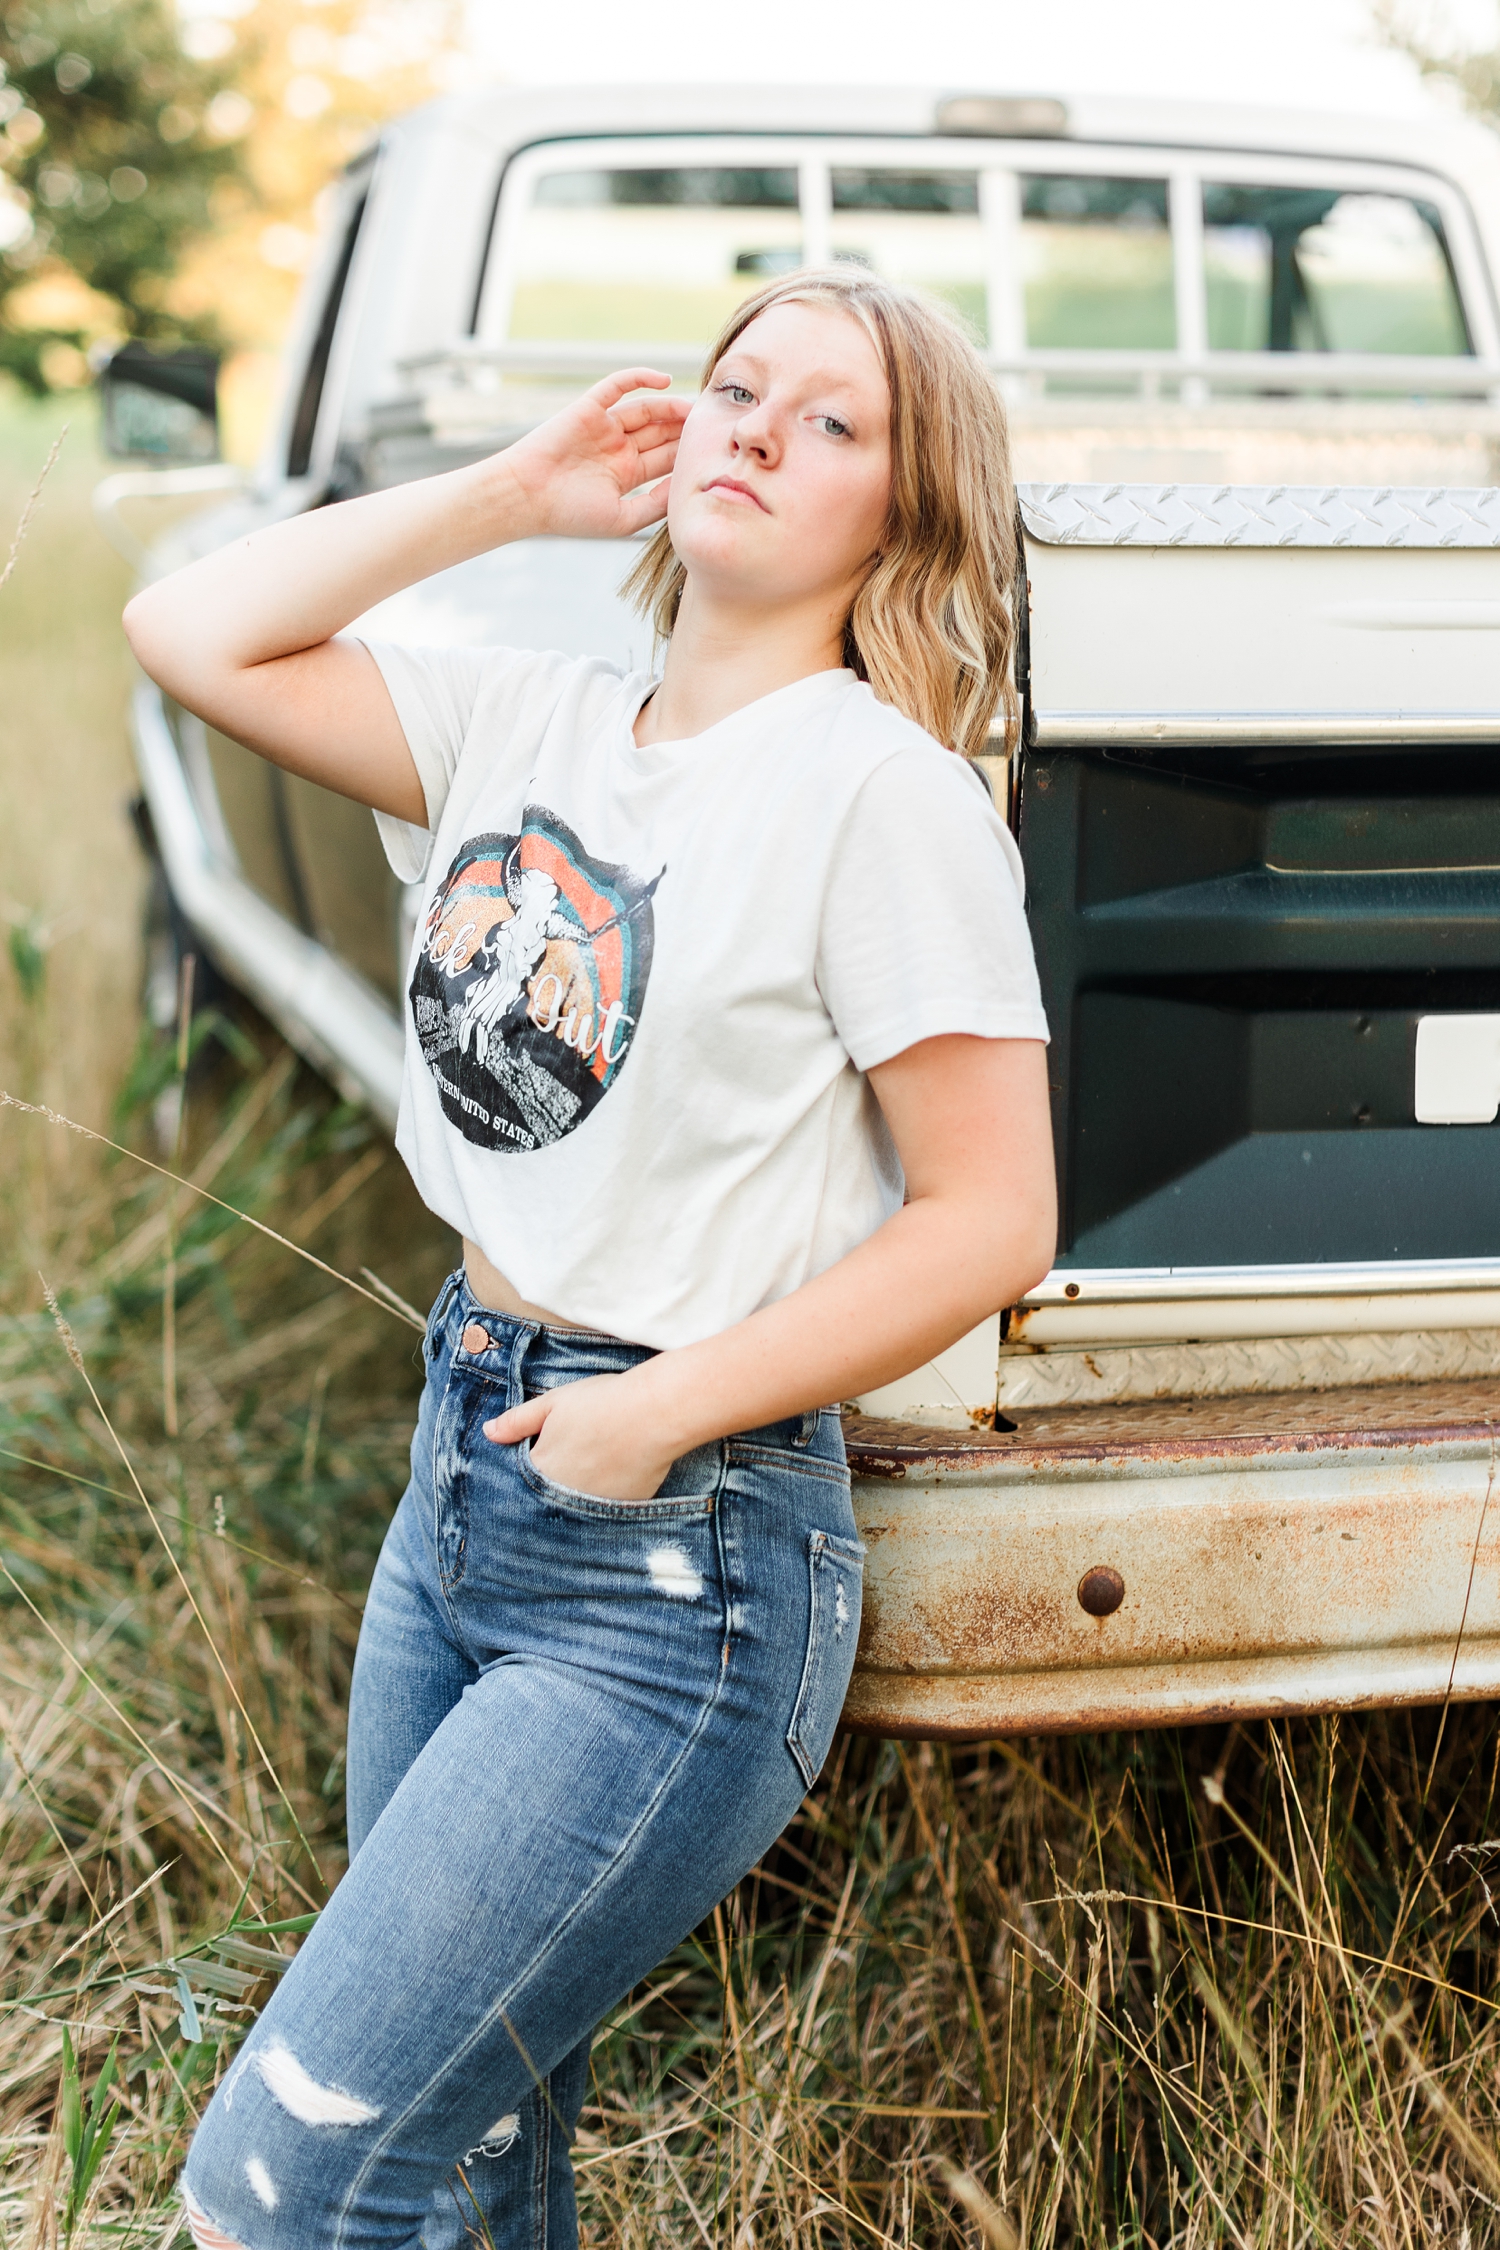 Kenzie leans on the back of a 70's Ford Highboy truck in the middle of a grassy field | CB Studio